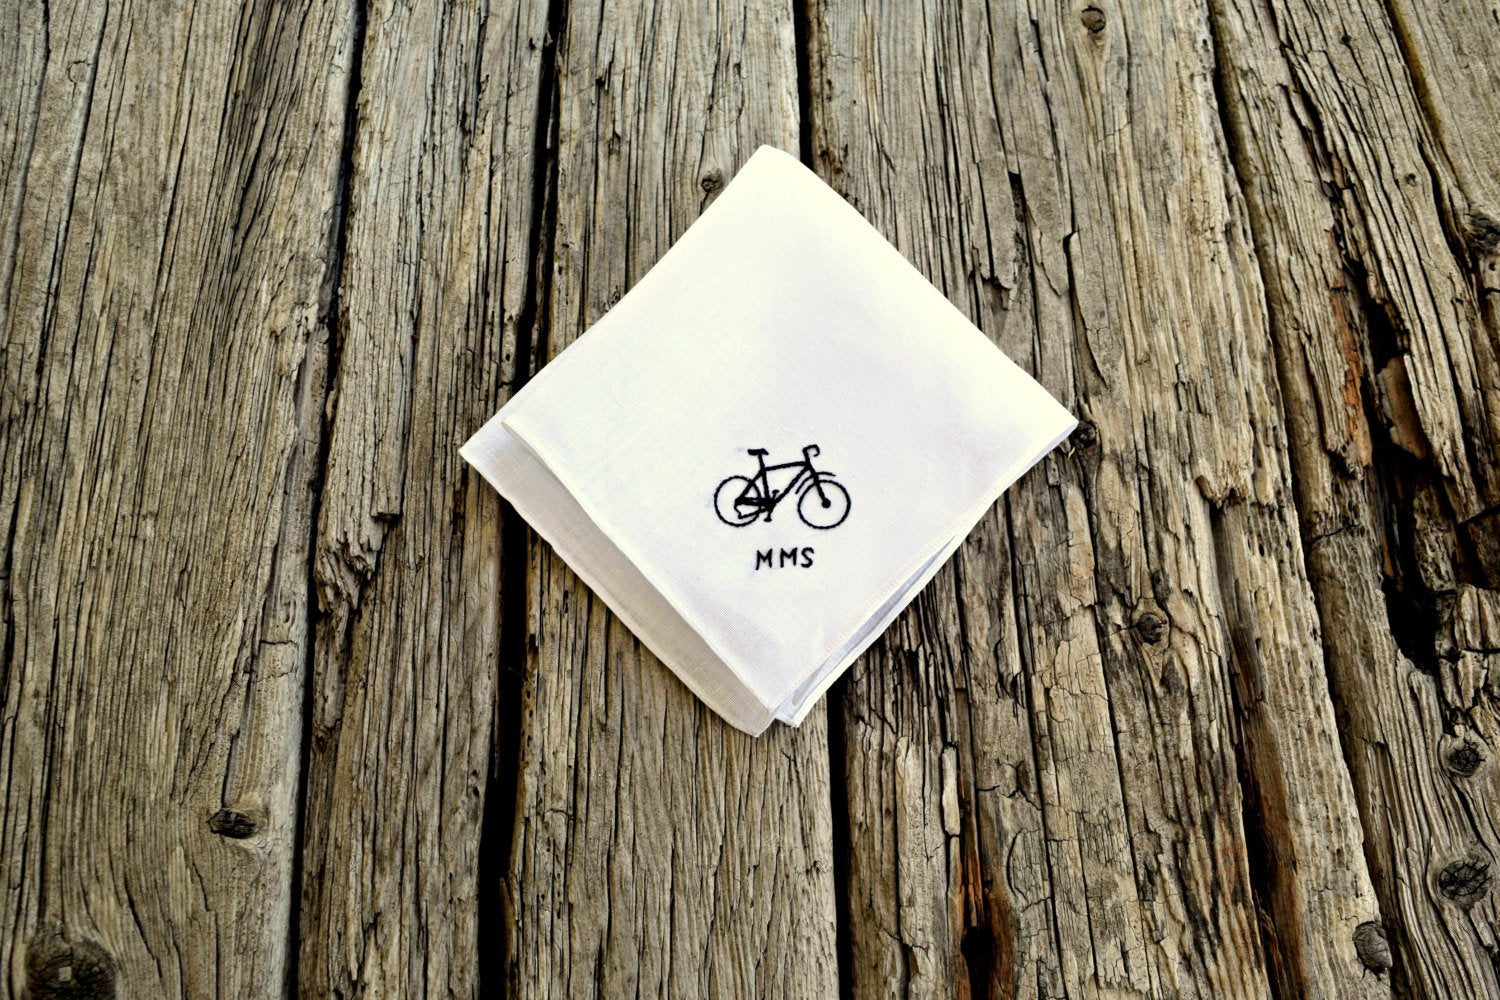 White Irish linen pocket square hand embroidered with black bike and initials